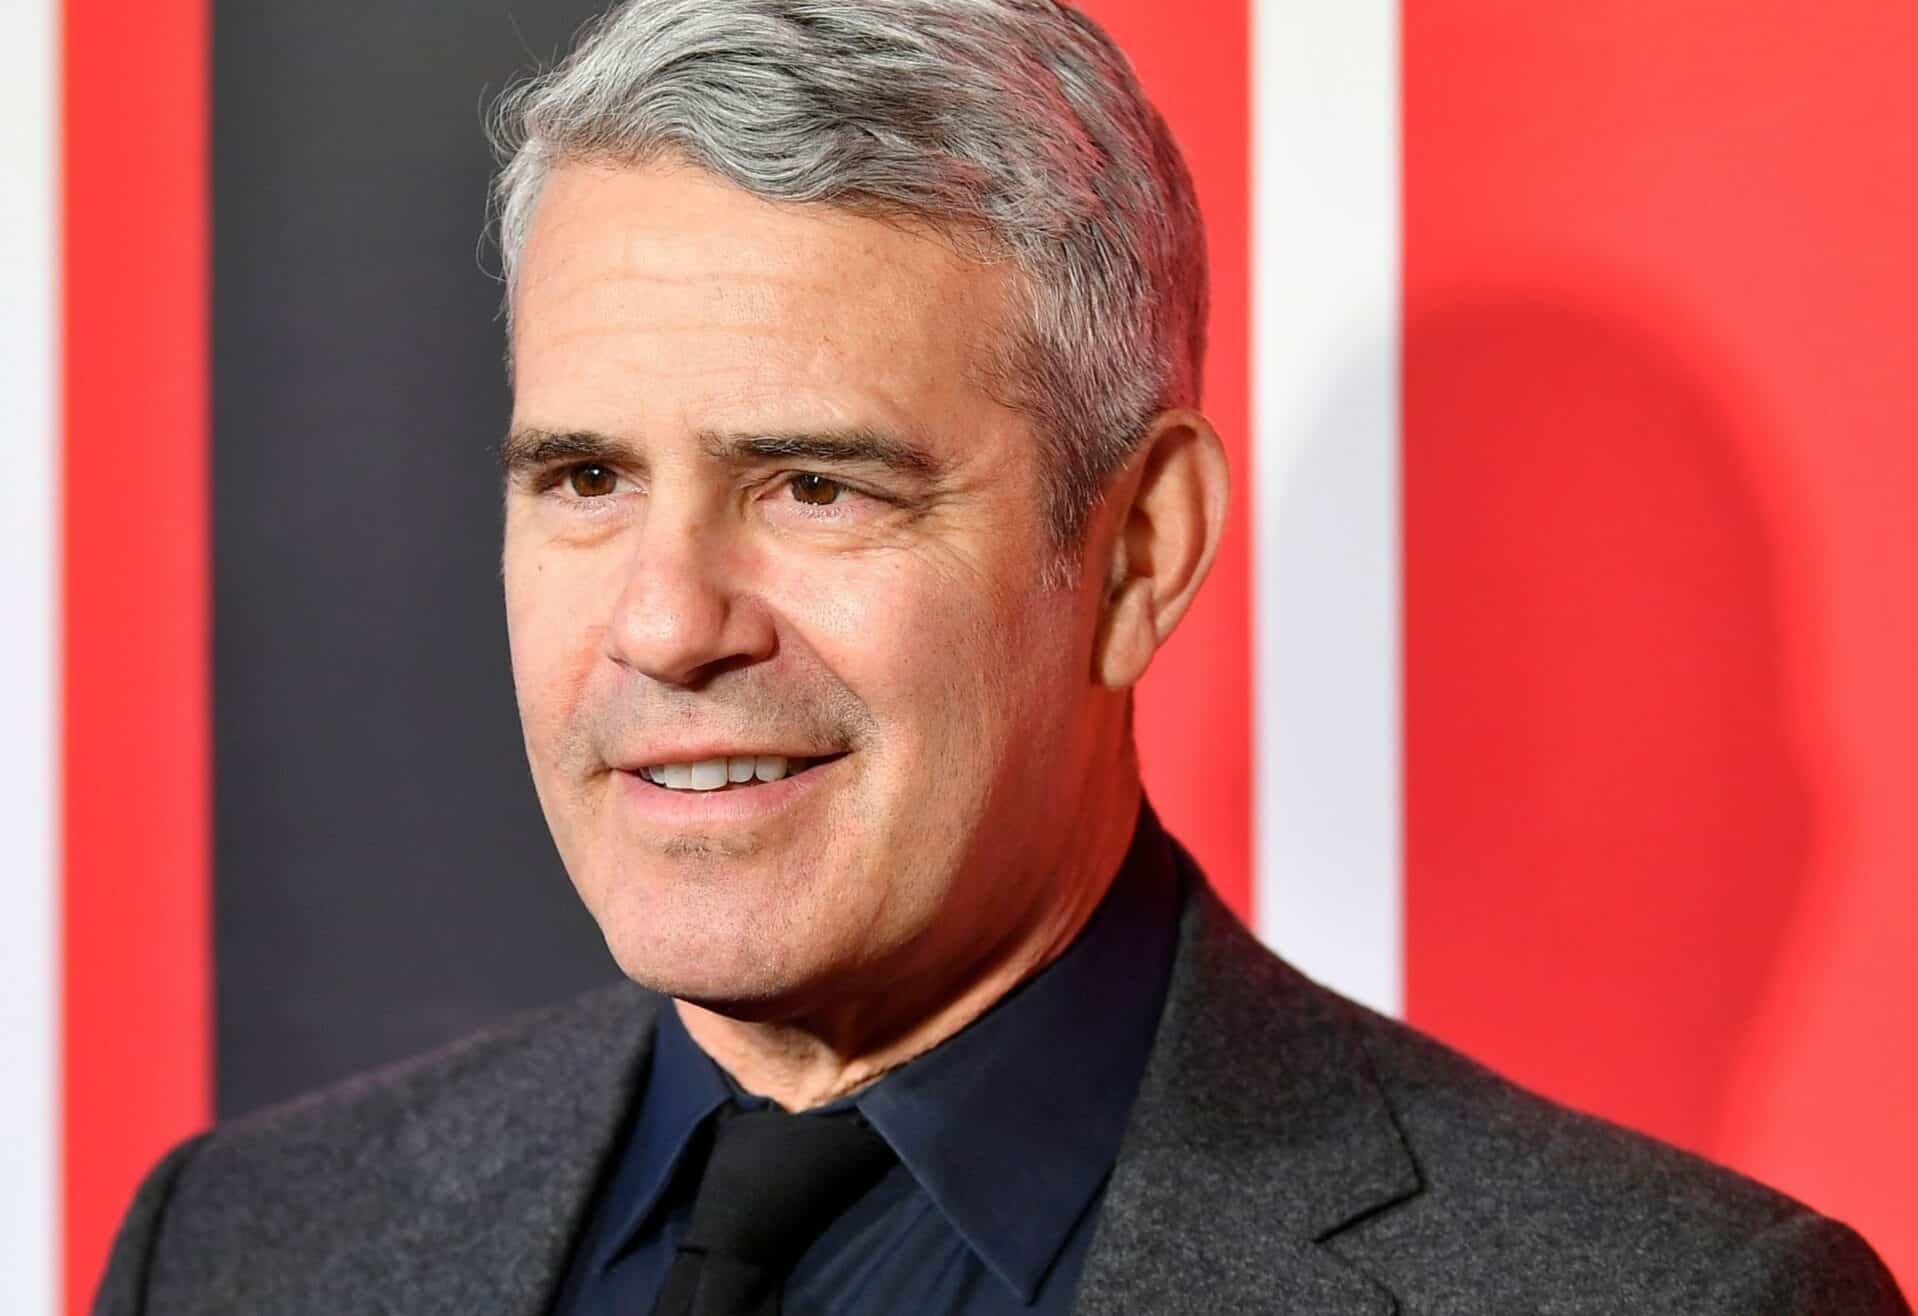 Andy Cohen has faced criticism for comments about the controversial "diet drug" Ozempic and his broader remarks on weight loss